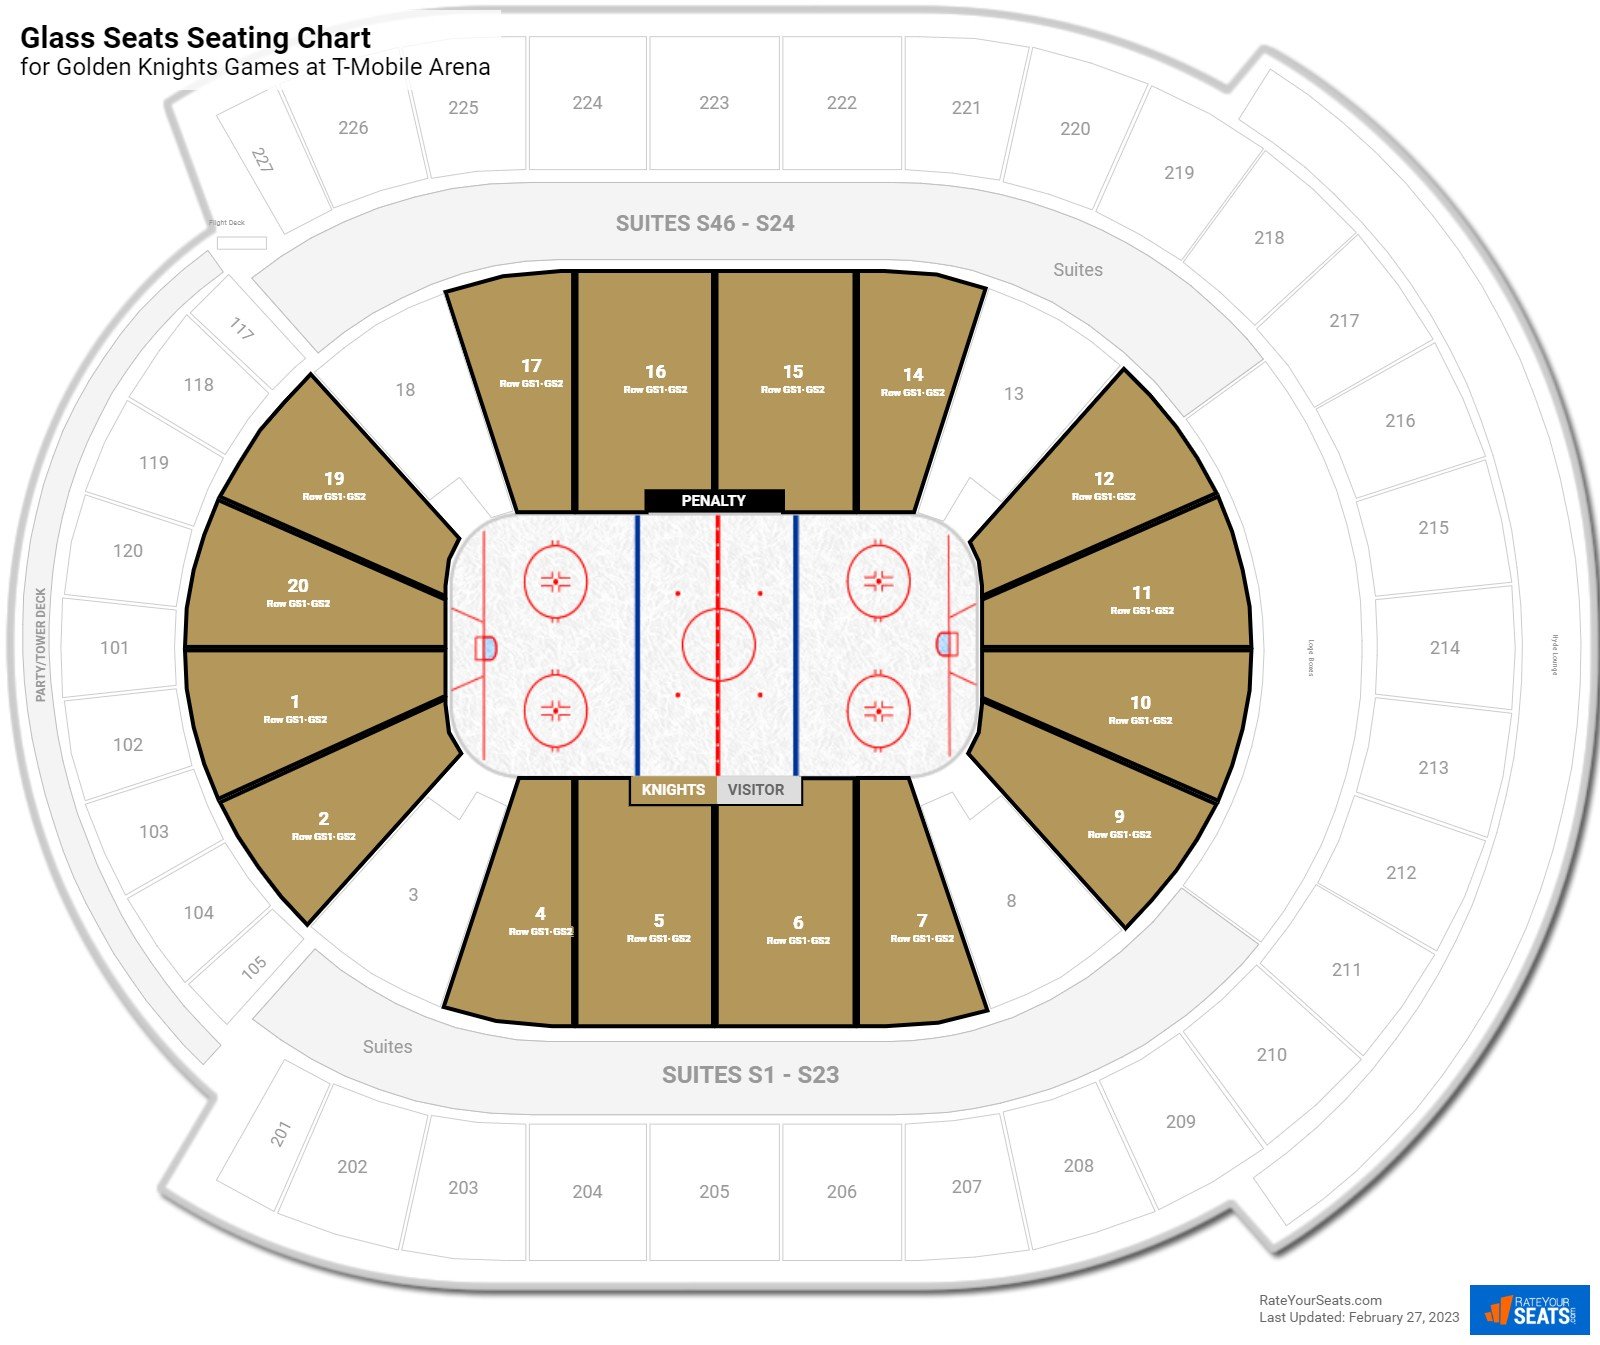 Golden Knights Glass Seats Seating Chart at T-Mobile Arena